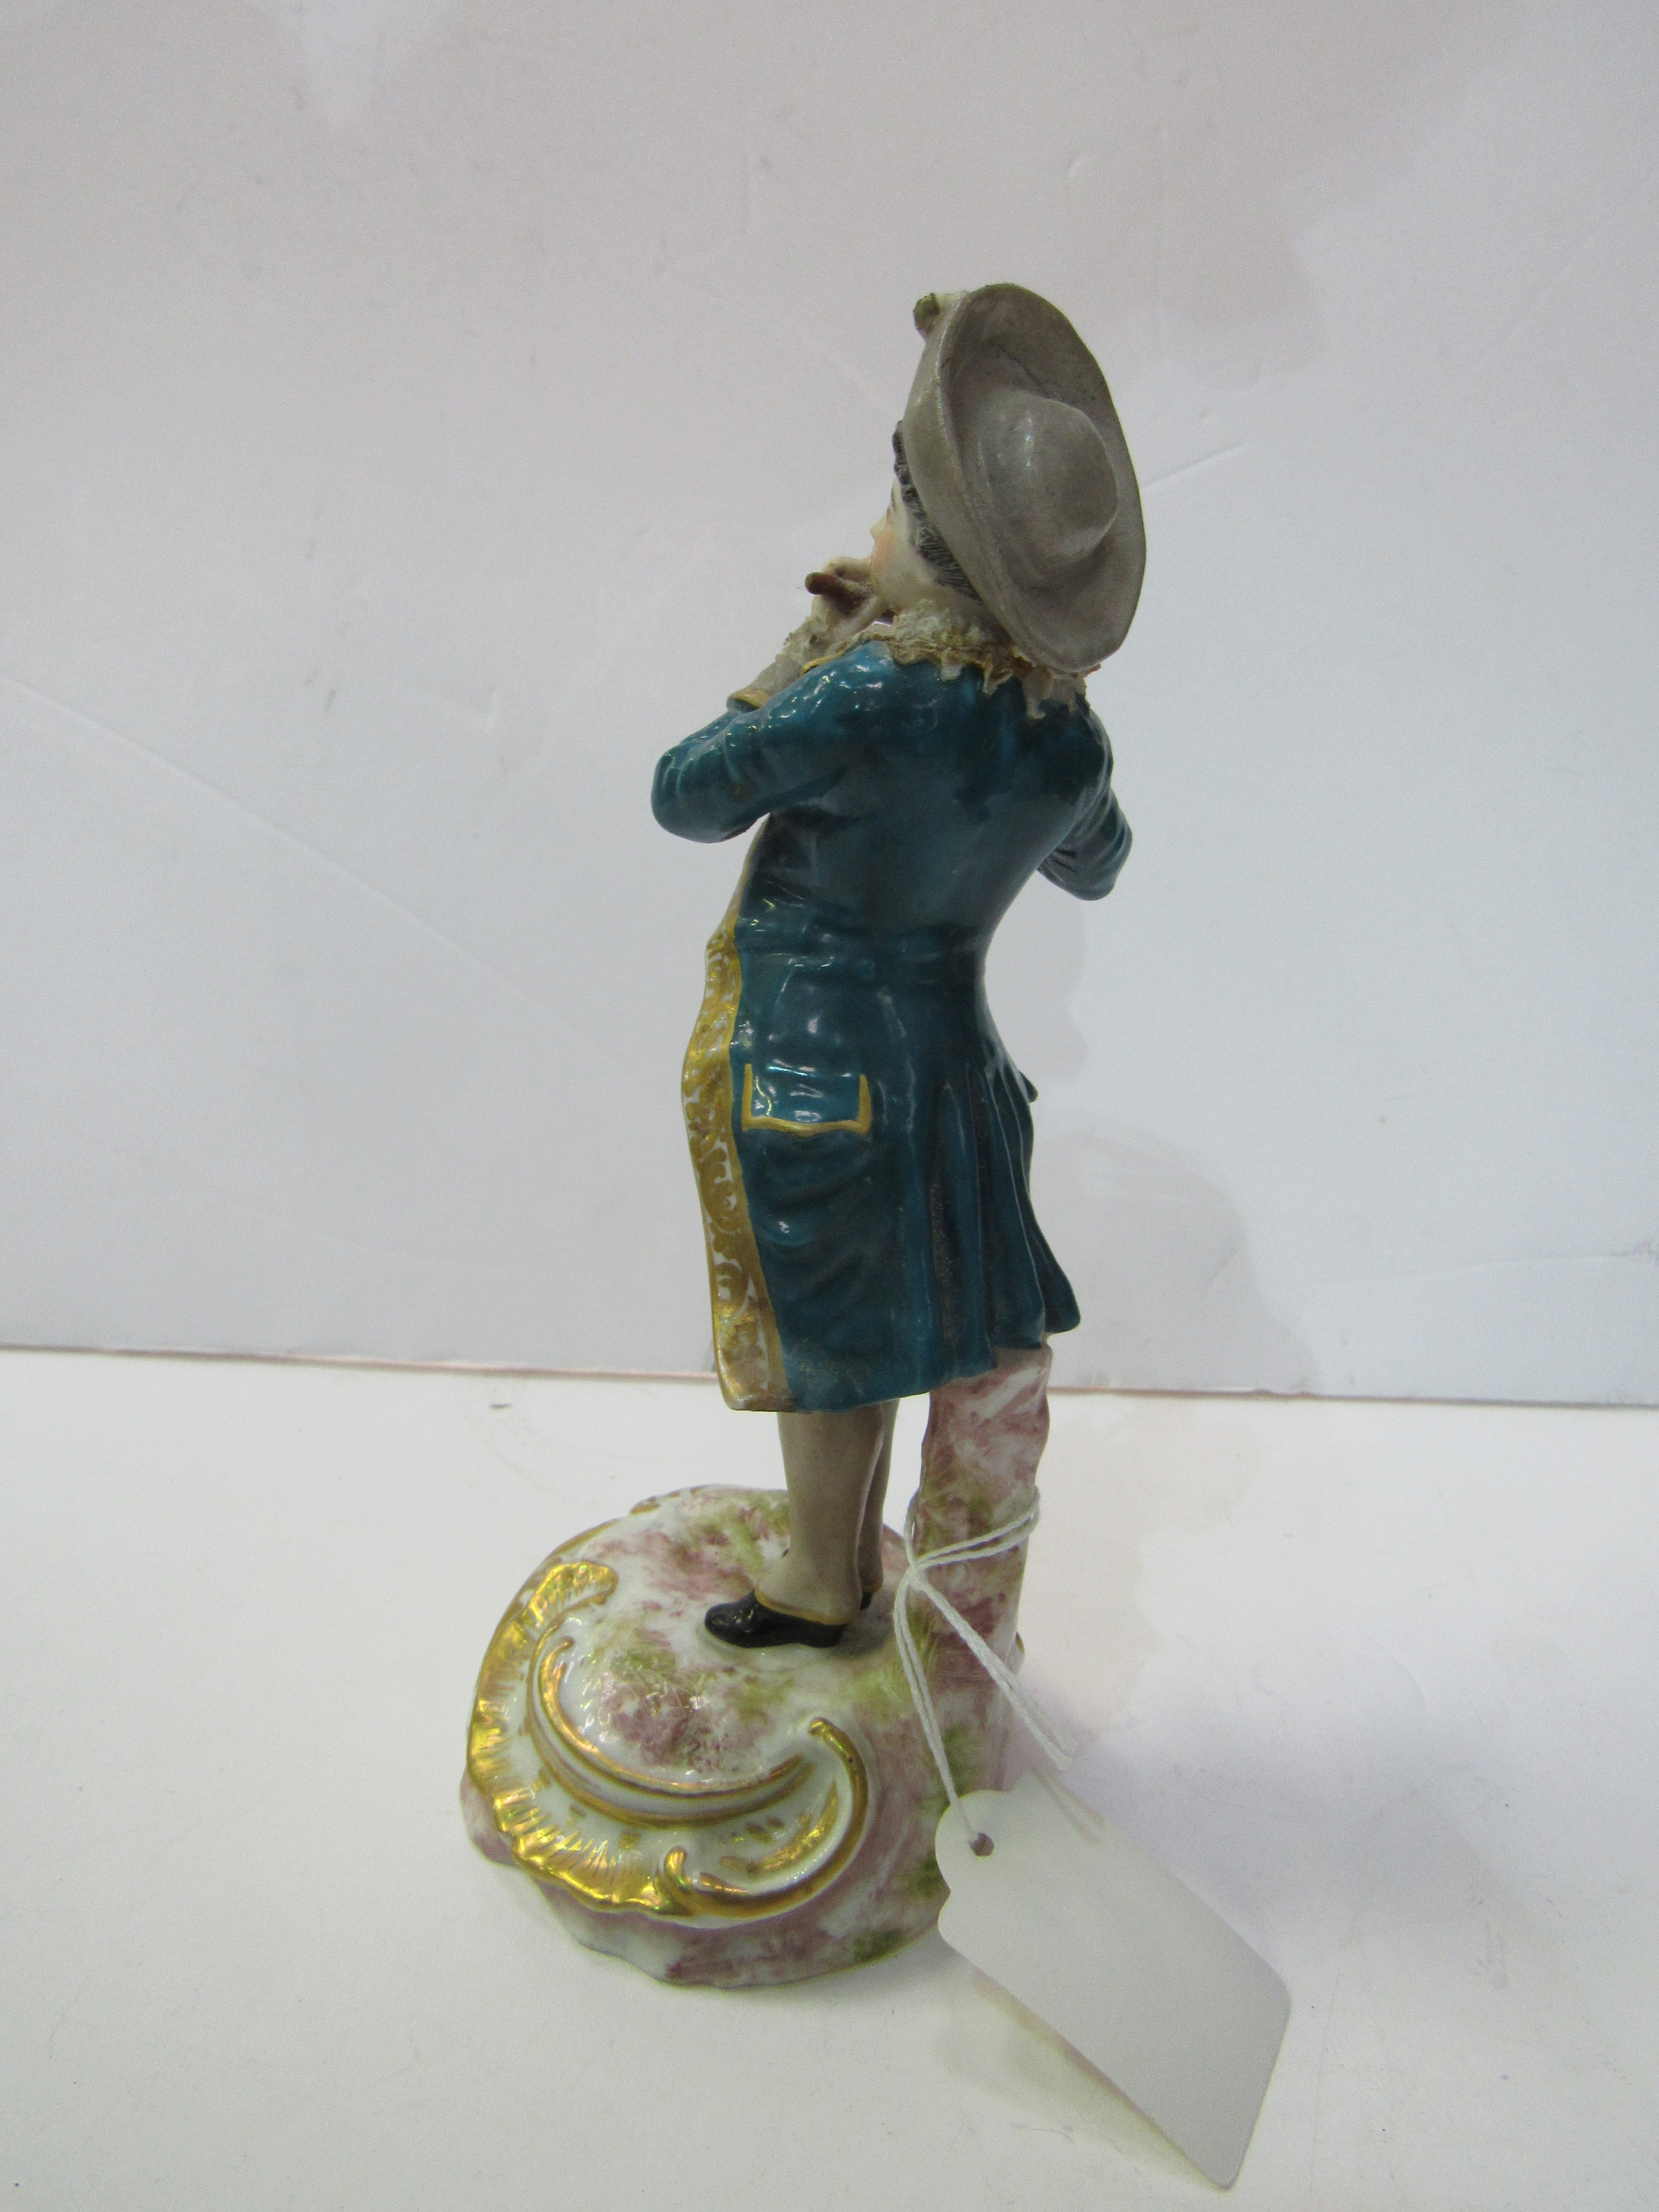 19th Century Meissen figure of a man playing a flute. Estimate £60-80. - Image 2 of 2